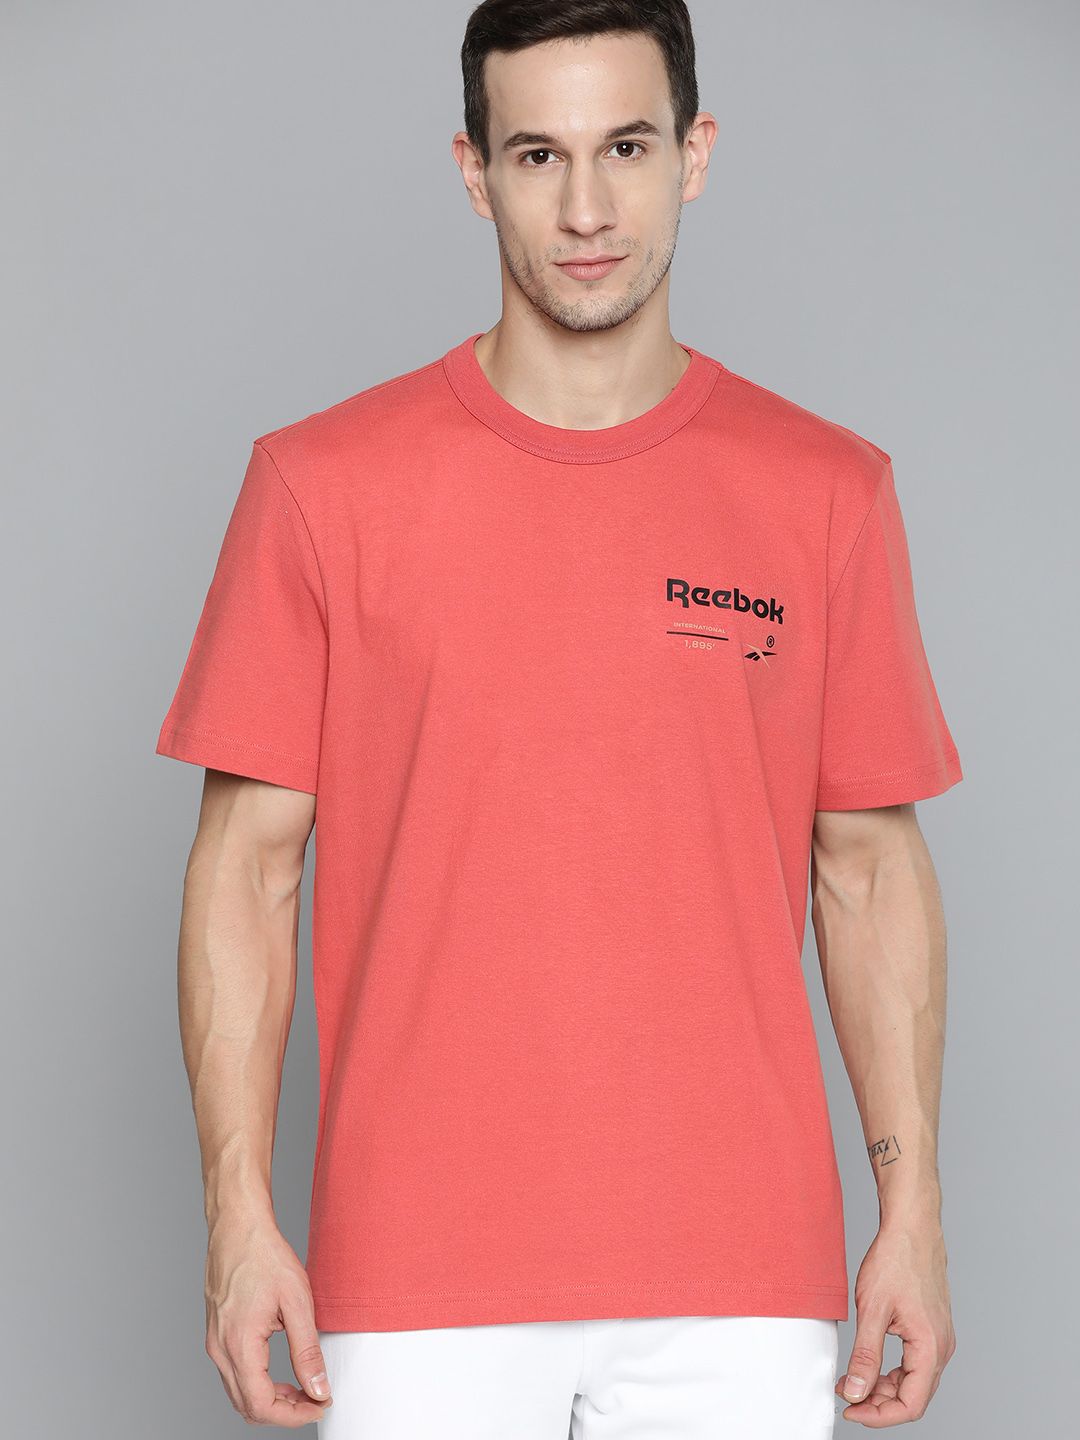 Reebok Classic Unisex Coral Red Pure Cotton Brand Logo Printed T-shirt Price in India